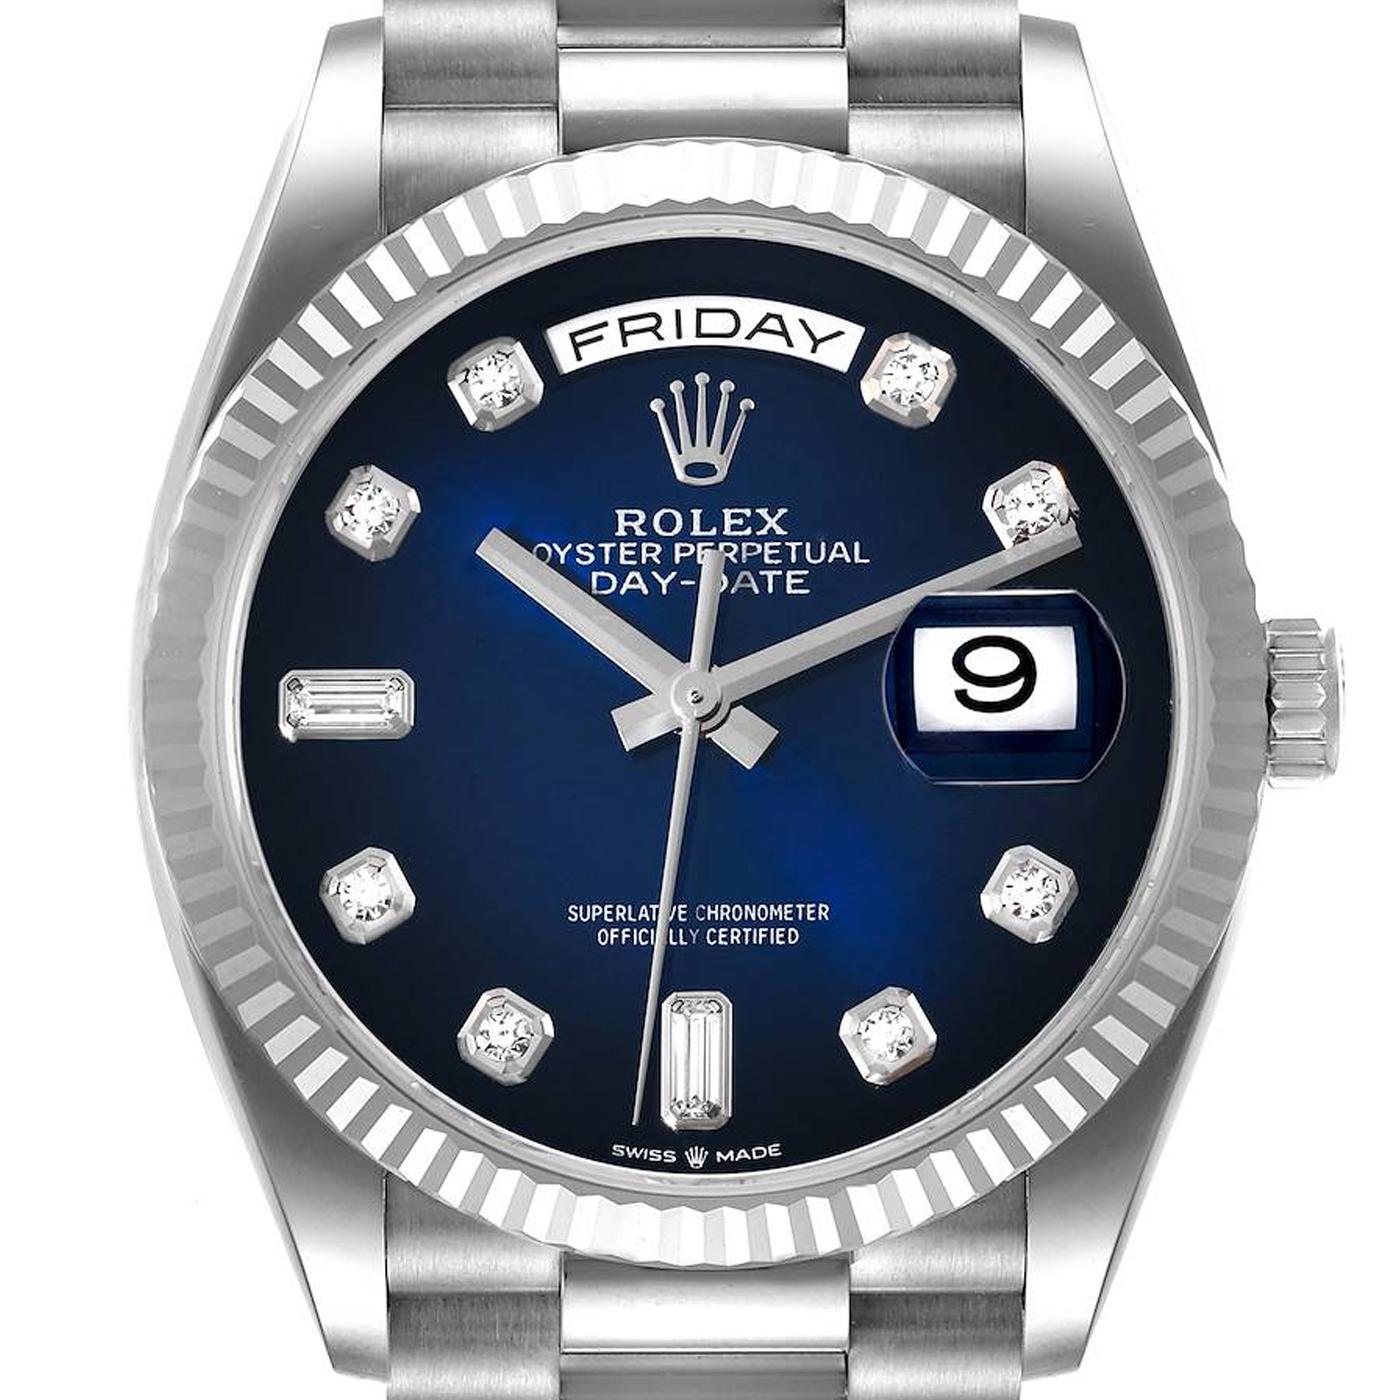 The Oyster Perpetual Day-Date 36 in 18 Ct White Gold with a Blue Ombré, Diamond-Set Dial, Fluted Bezel, and a President Bracelet. The Day-Date was the first watch to indicate the day of the week spelled out in full when it was first presented in